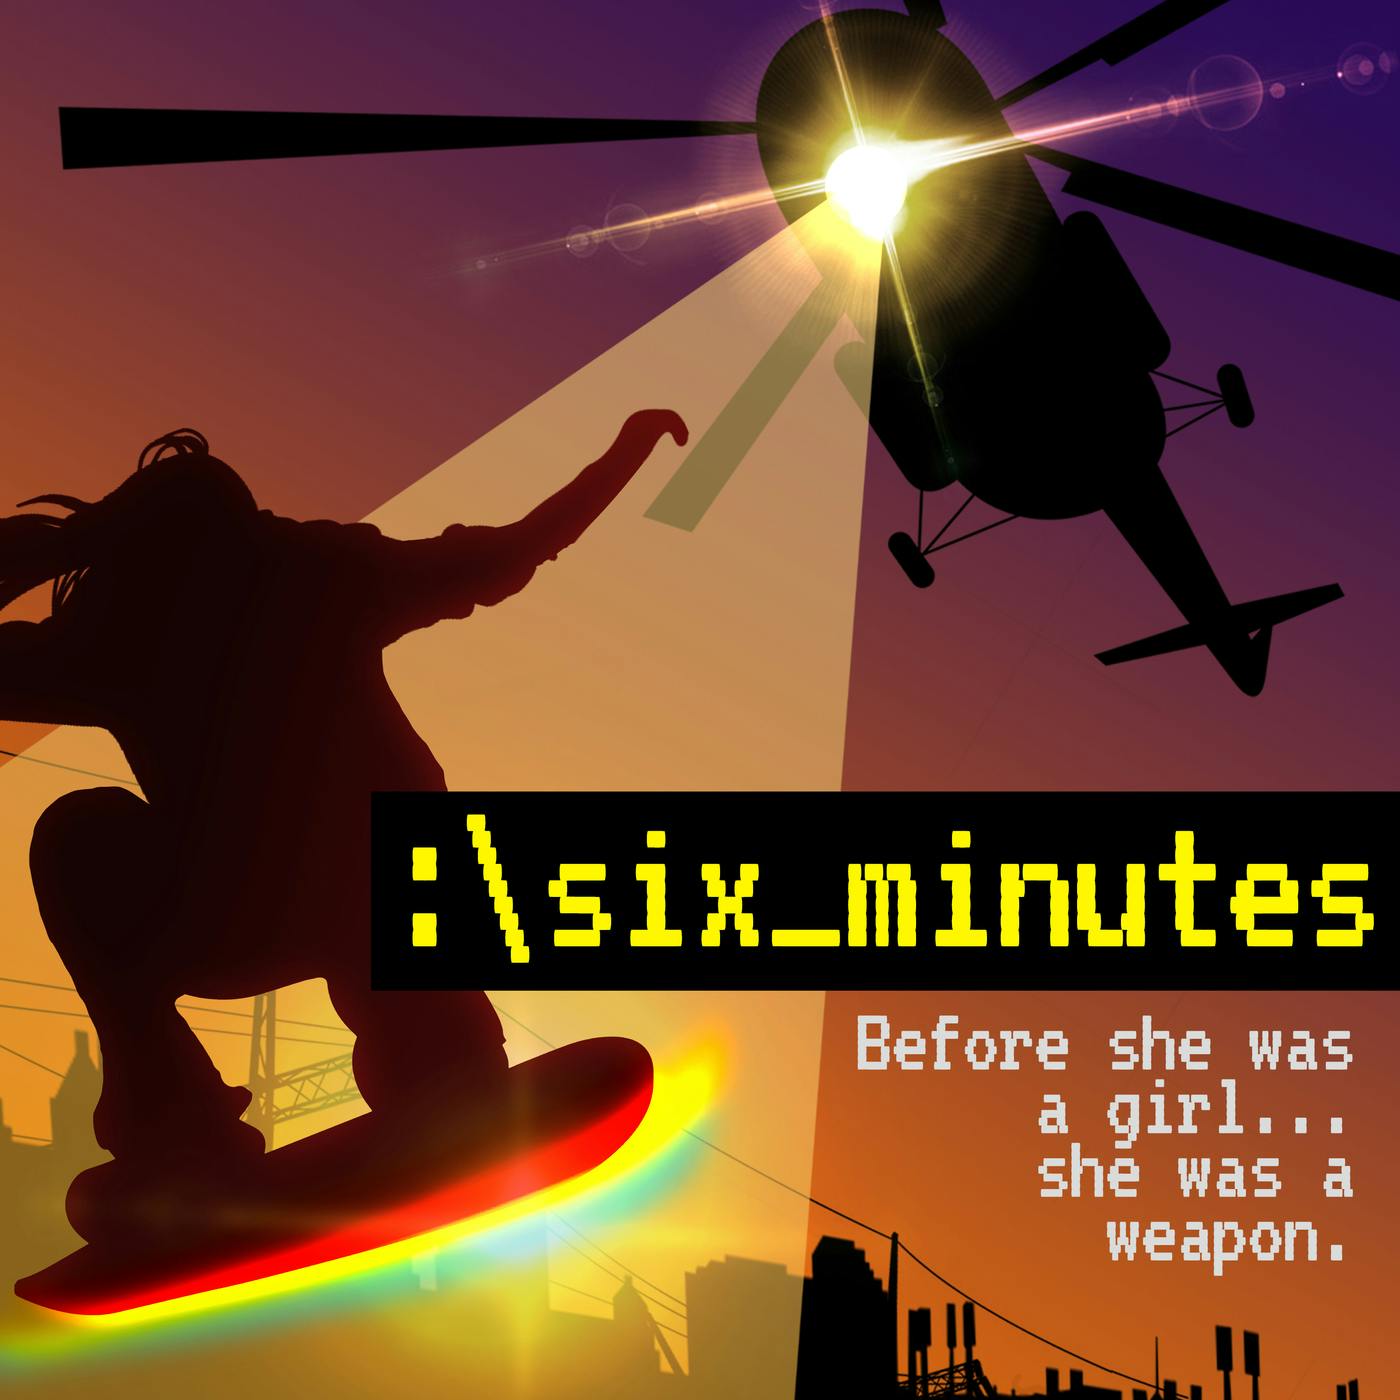 S1 E14: Six Minutes Breaking into a Military Base